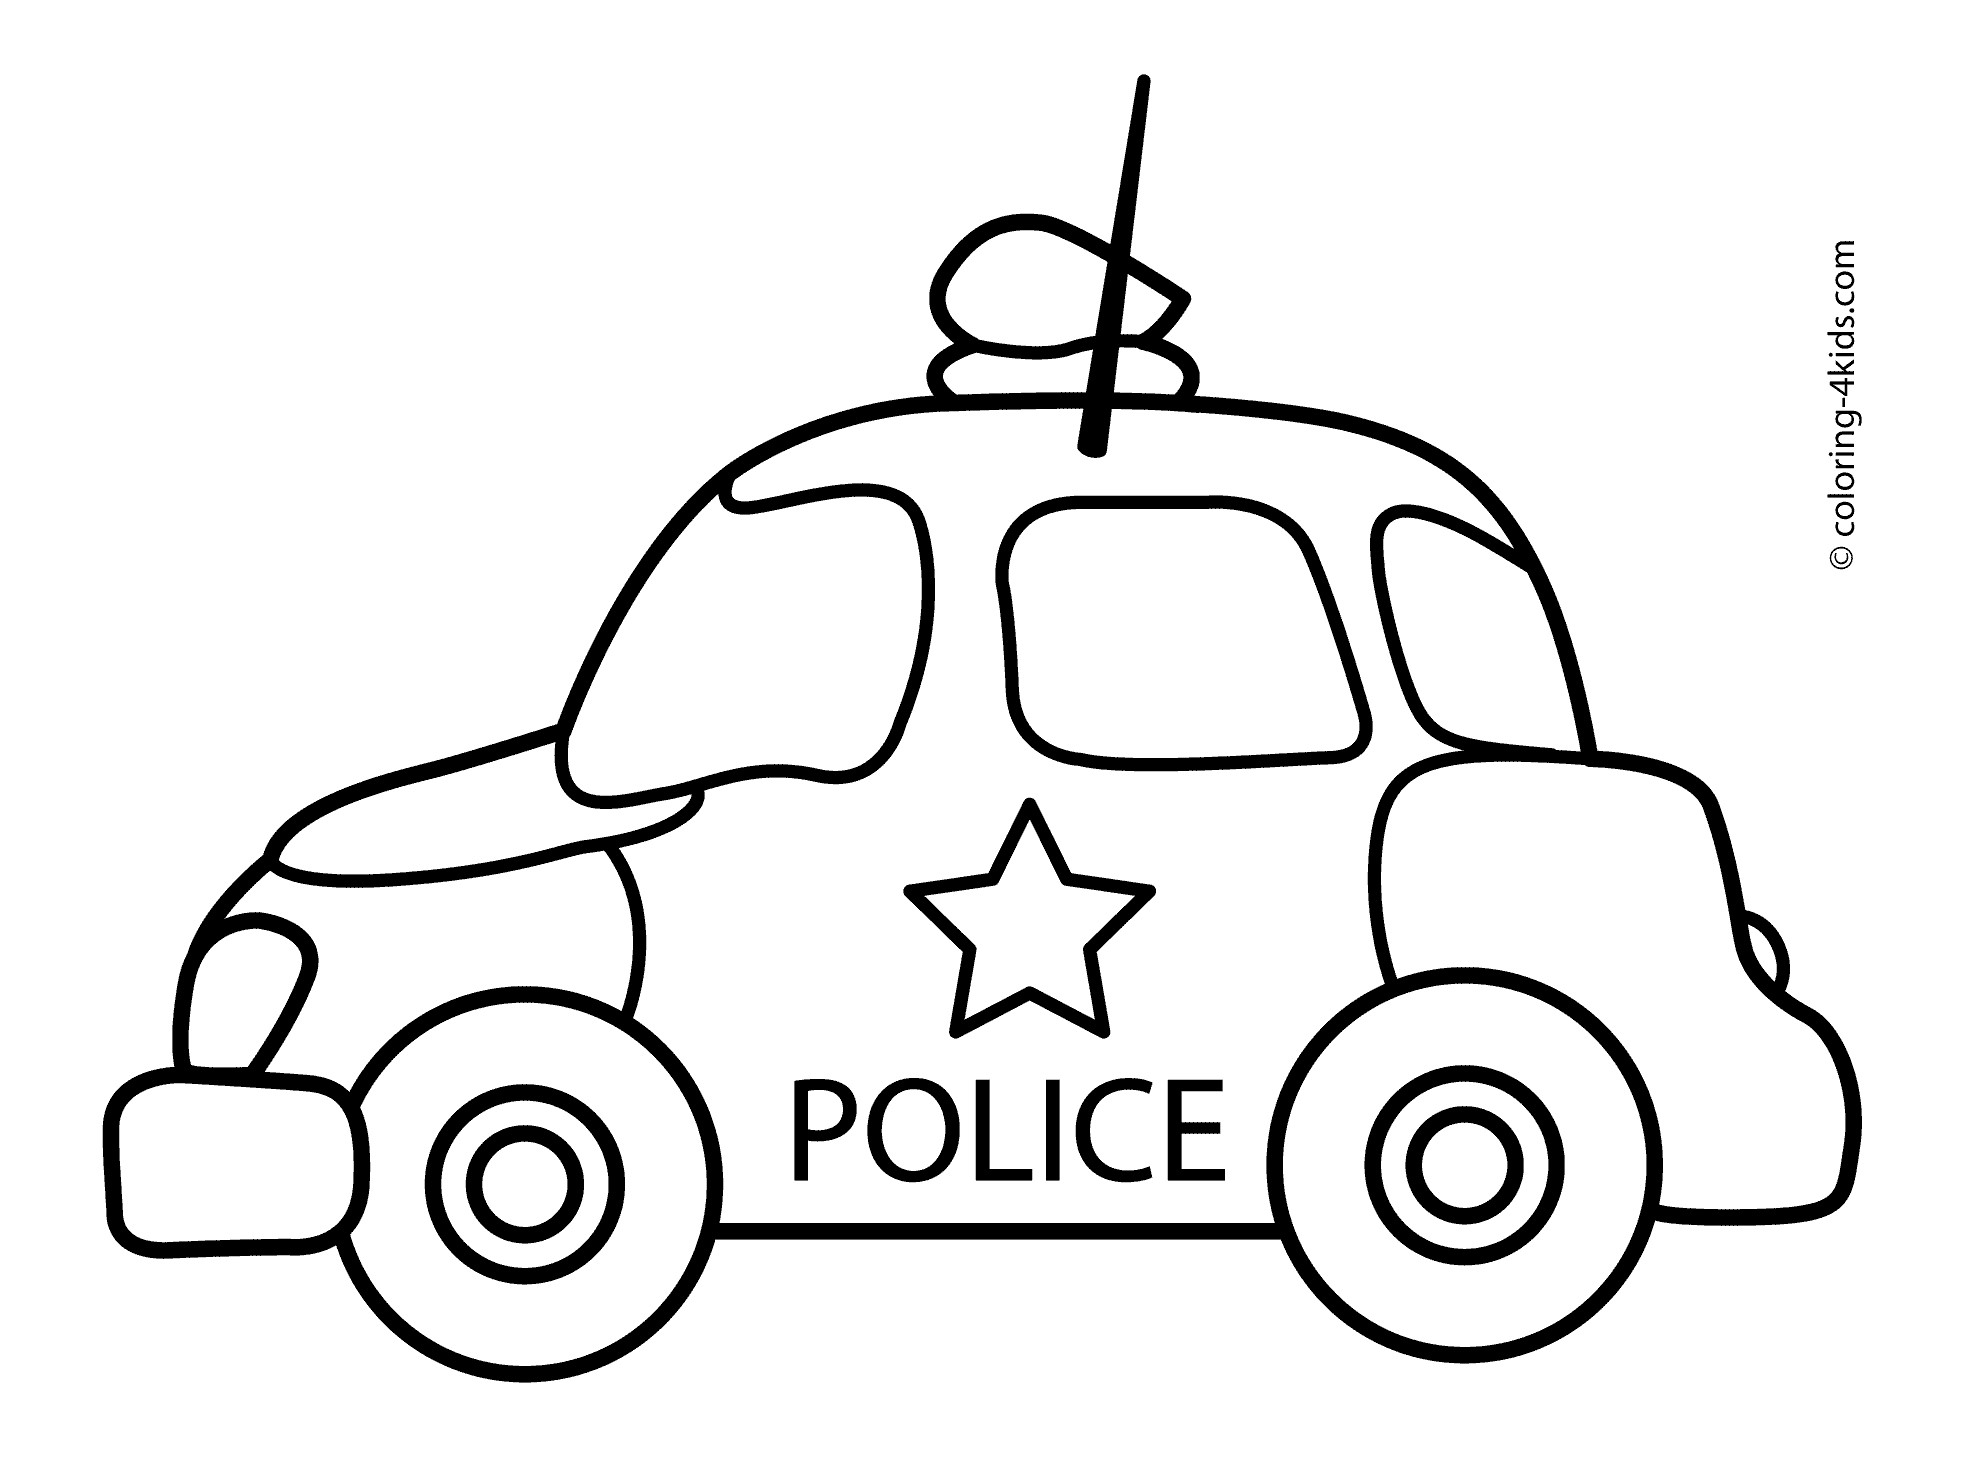 Coloring Sheets For Boys Cars
 Car Coloring Sheets For Boys – Color Bros